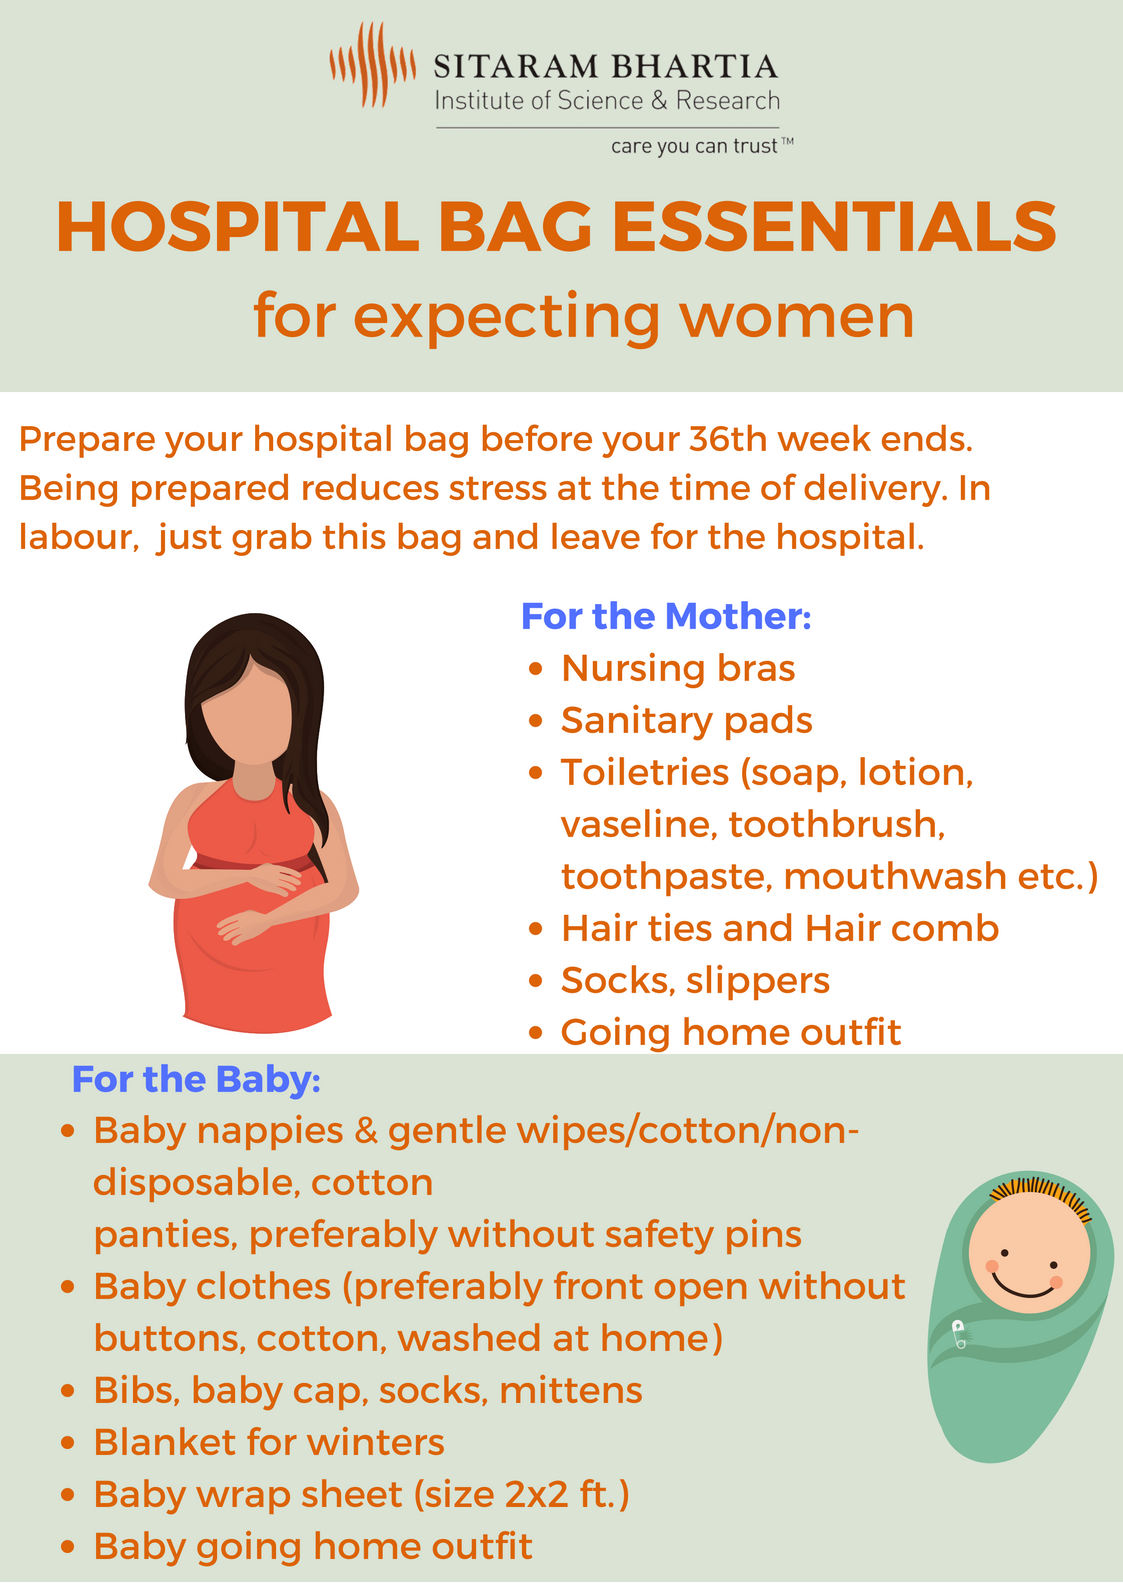 baby items for hospital bag